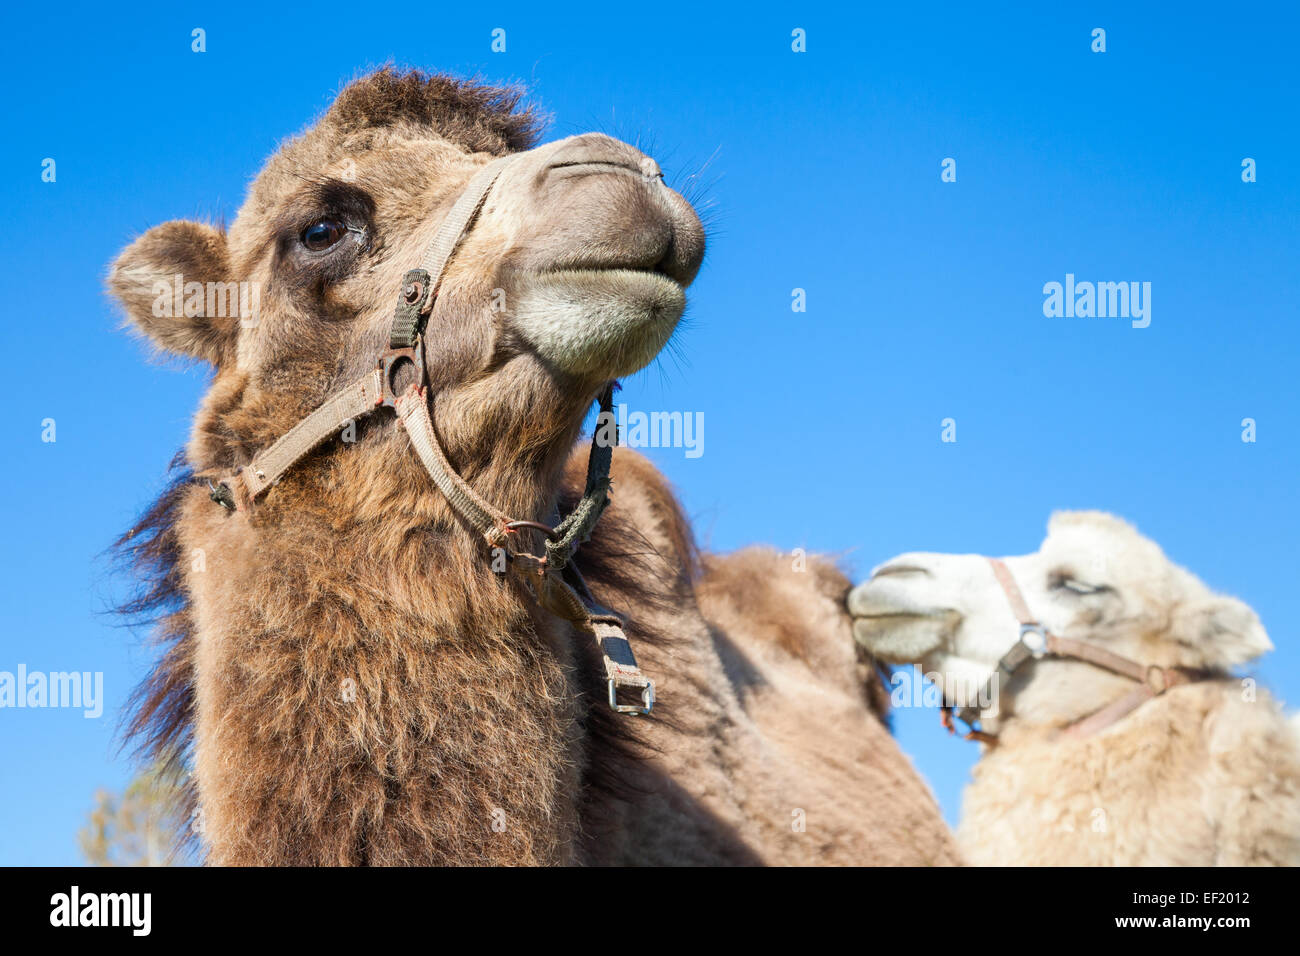 couple of cute dromedary camels Stock Photo